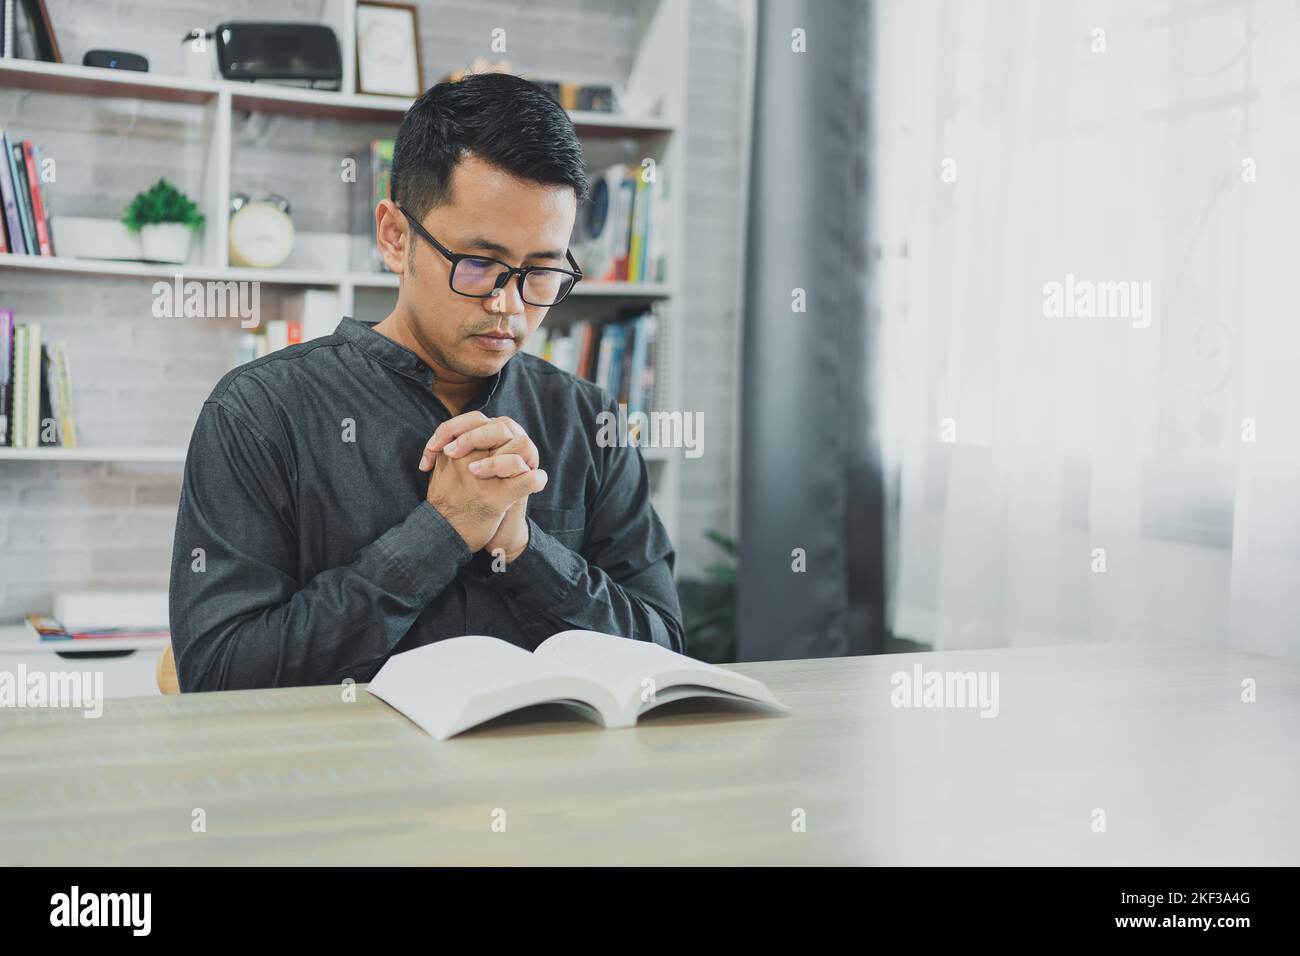 Asian man doing hands together in prayer to God along with the bible In the Christian concept of faith, spirituality and religion, men pray in the Bib Stock Photo